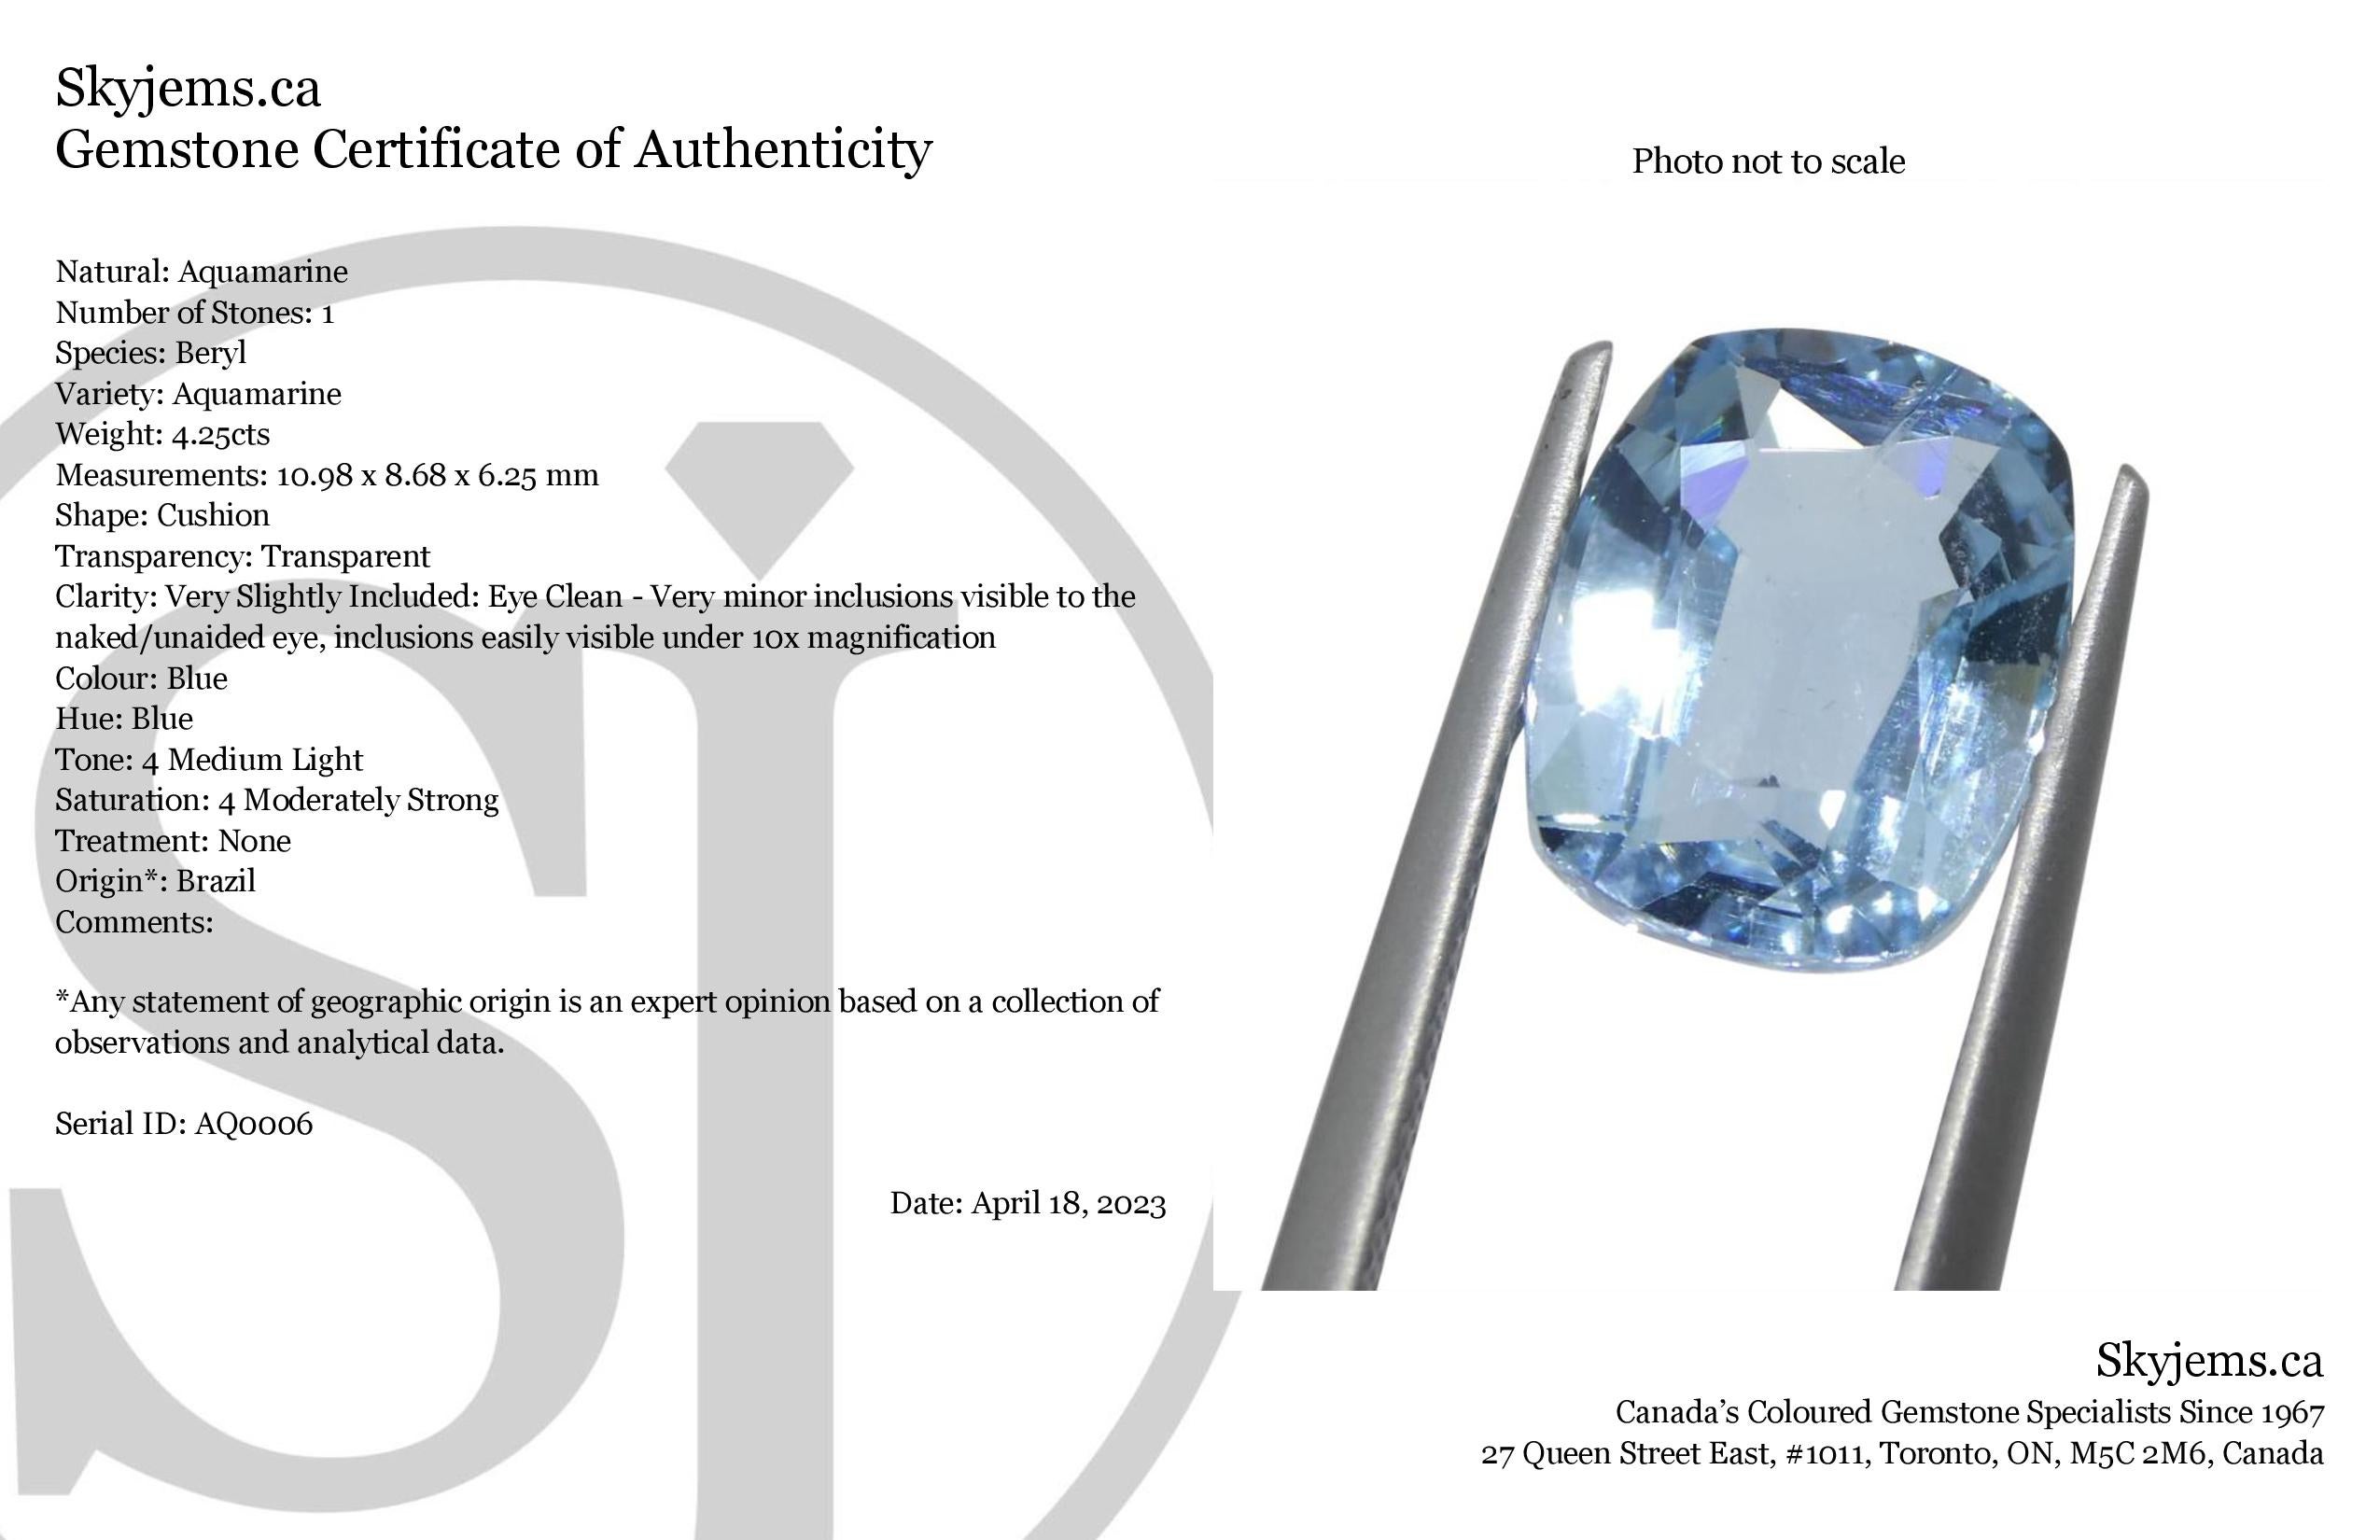 Description:

Gem Type: Aquamarine
Number of Stones: 1
Weight: 4.25 cts
Measurements: 10.98 x 8.68 x 6.25 mm
Shape: Cushion
Cutting Style Crown: Brilliant
Cutting Style Pavilion: Modified Brilliant Cut
Transparency: Transparent
Clarity: Very